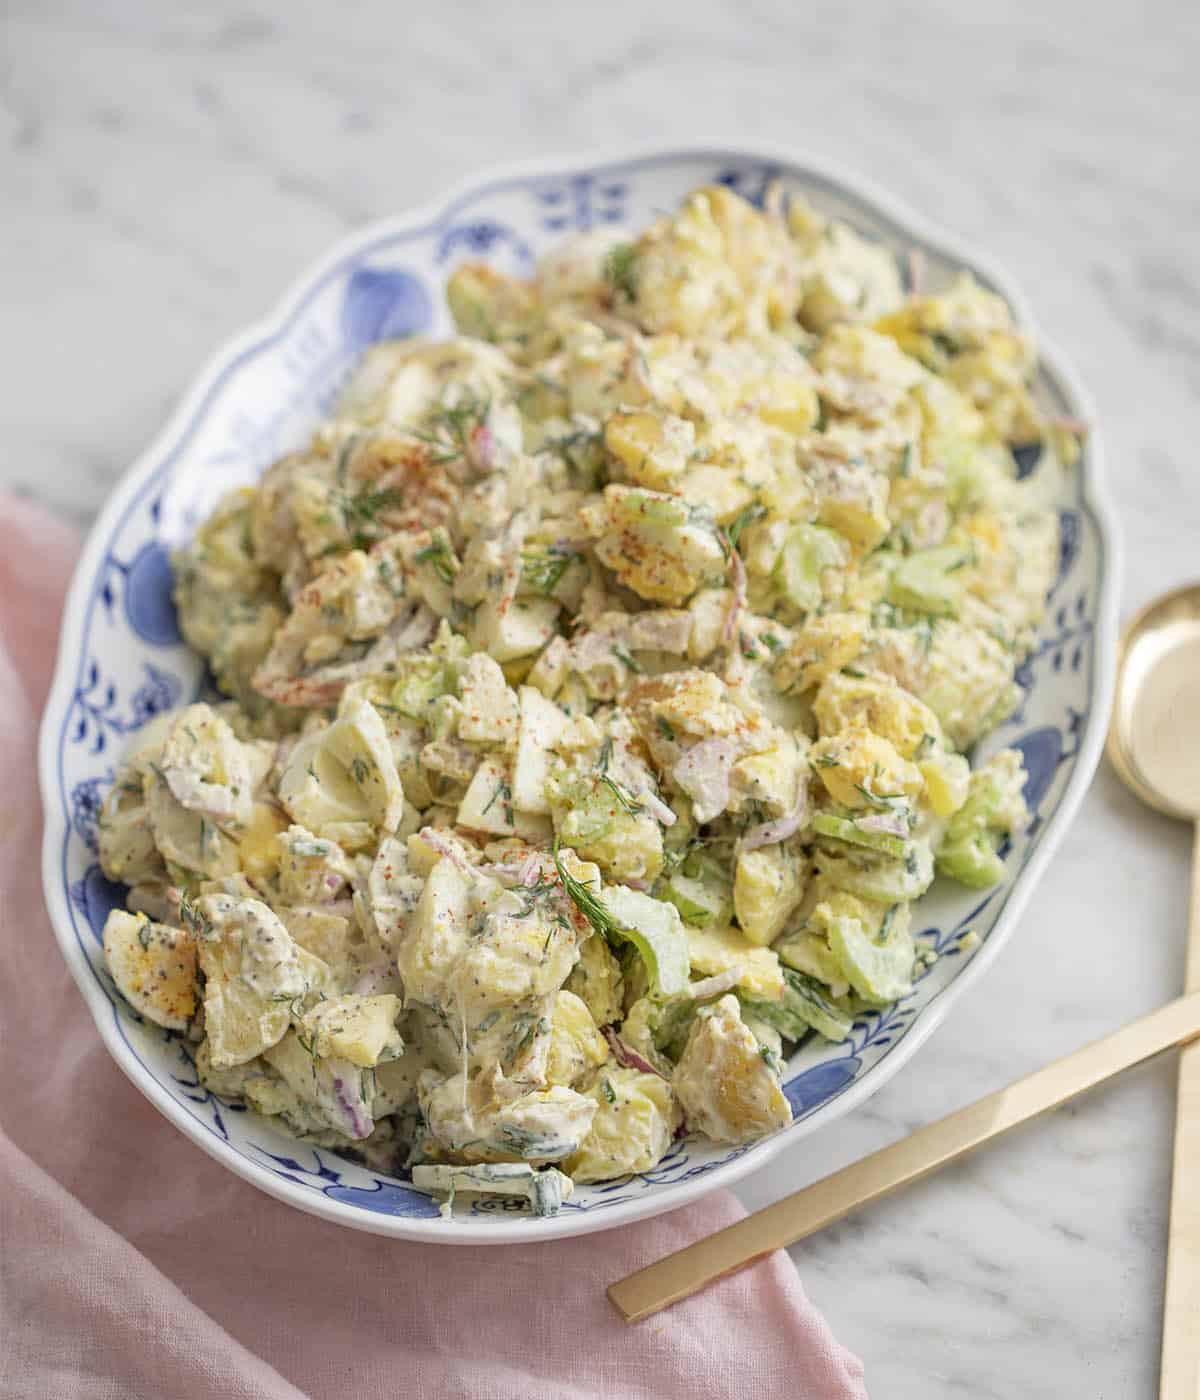 A potato salad in a blue and white serving dish.